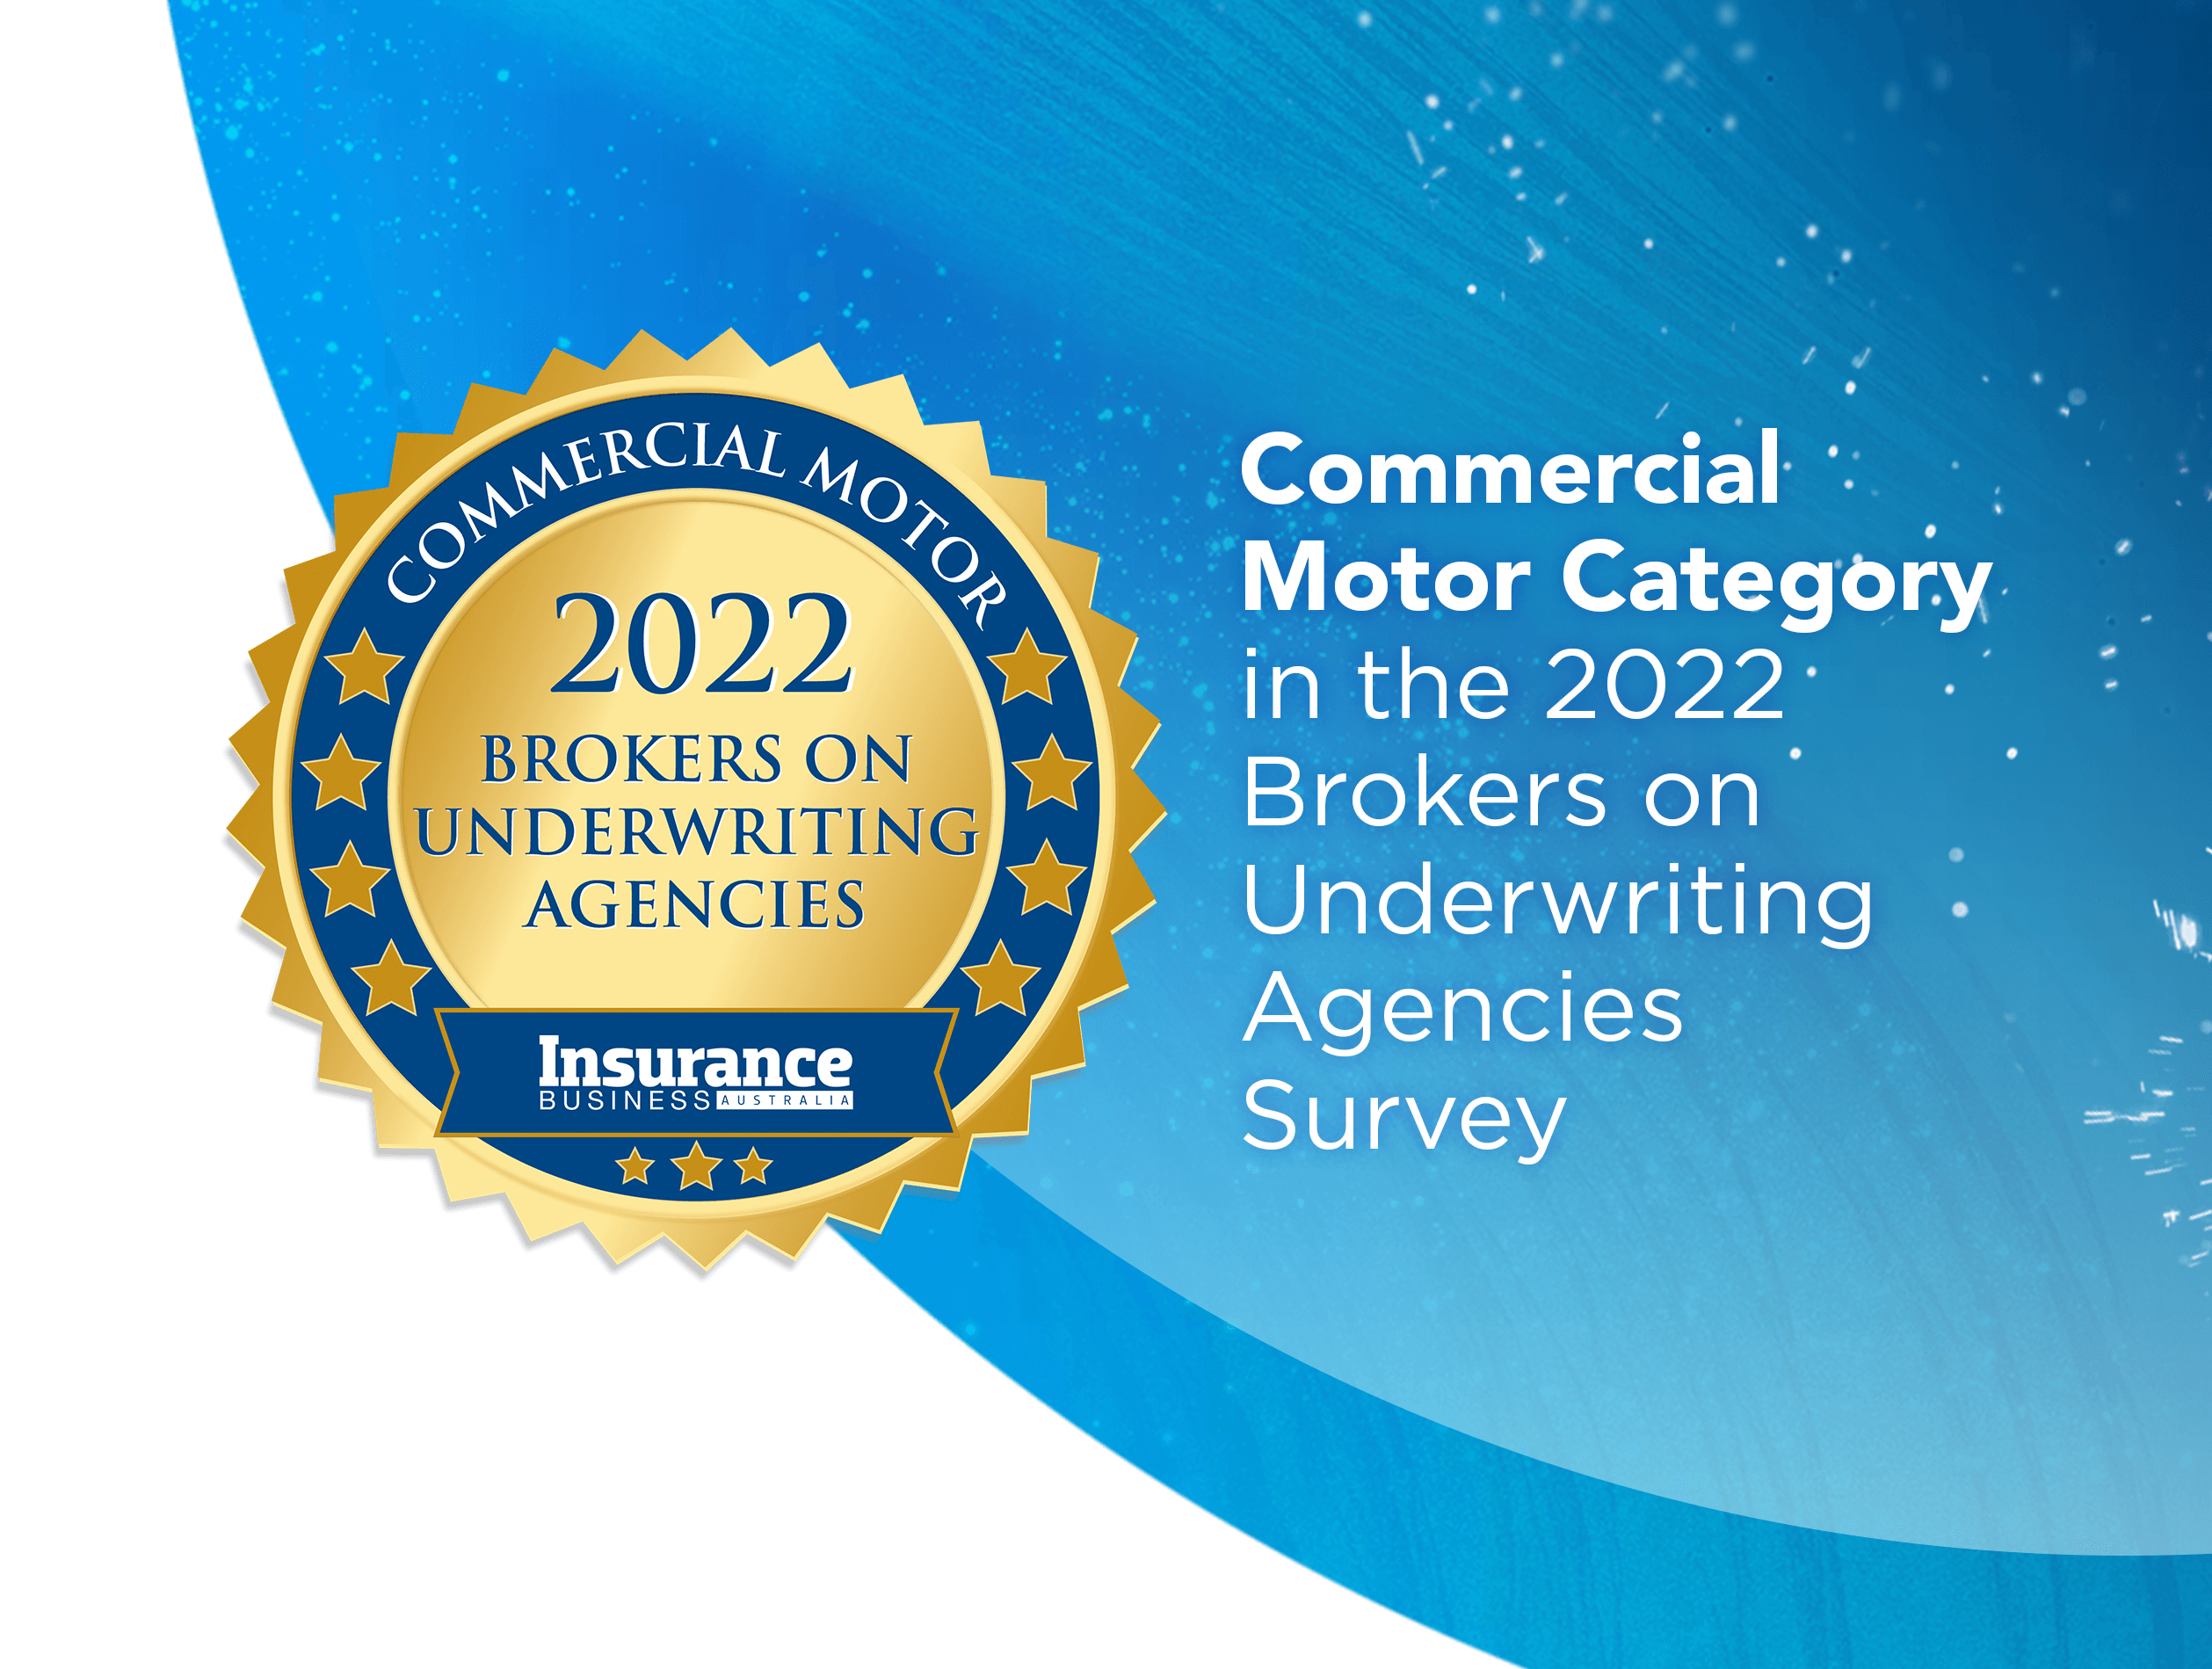 GT INSURANCE WINS GOLD IN 2022 BROKERS ON UNDERWRITING AGENCIES SURVEY FOR COMMERCIAL MOTOR CATEGORY